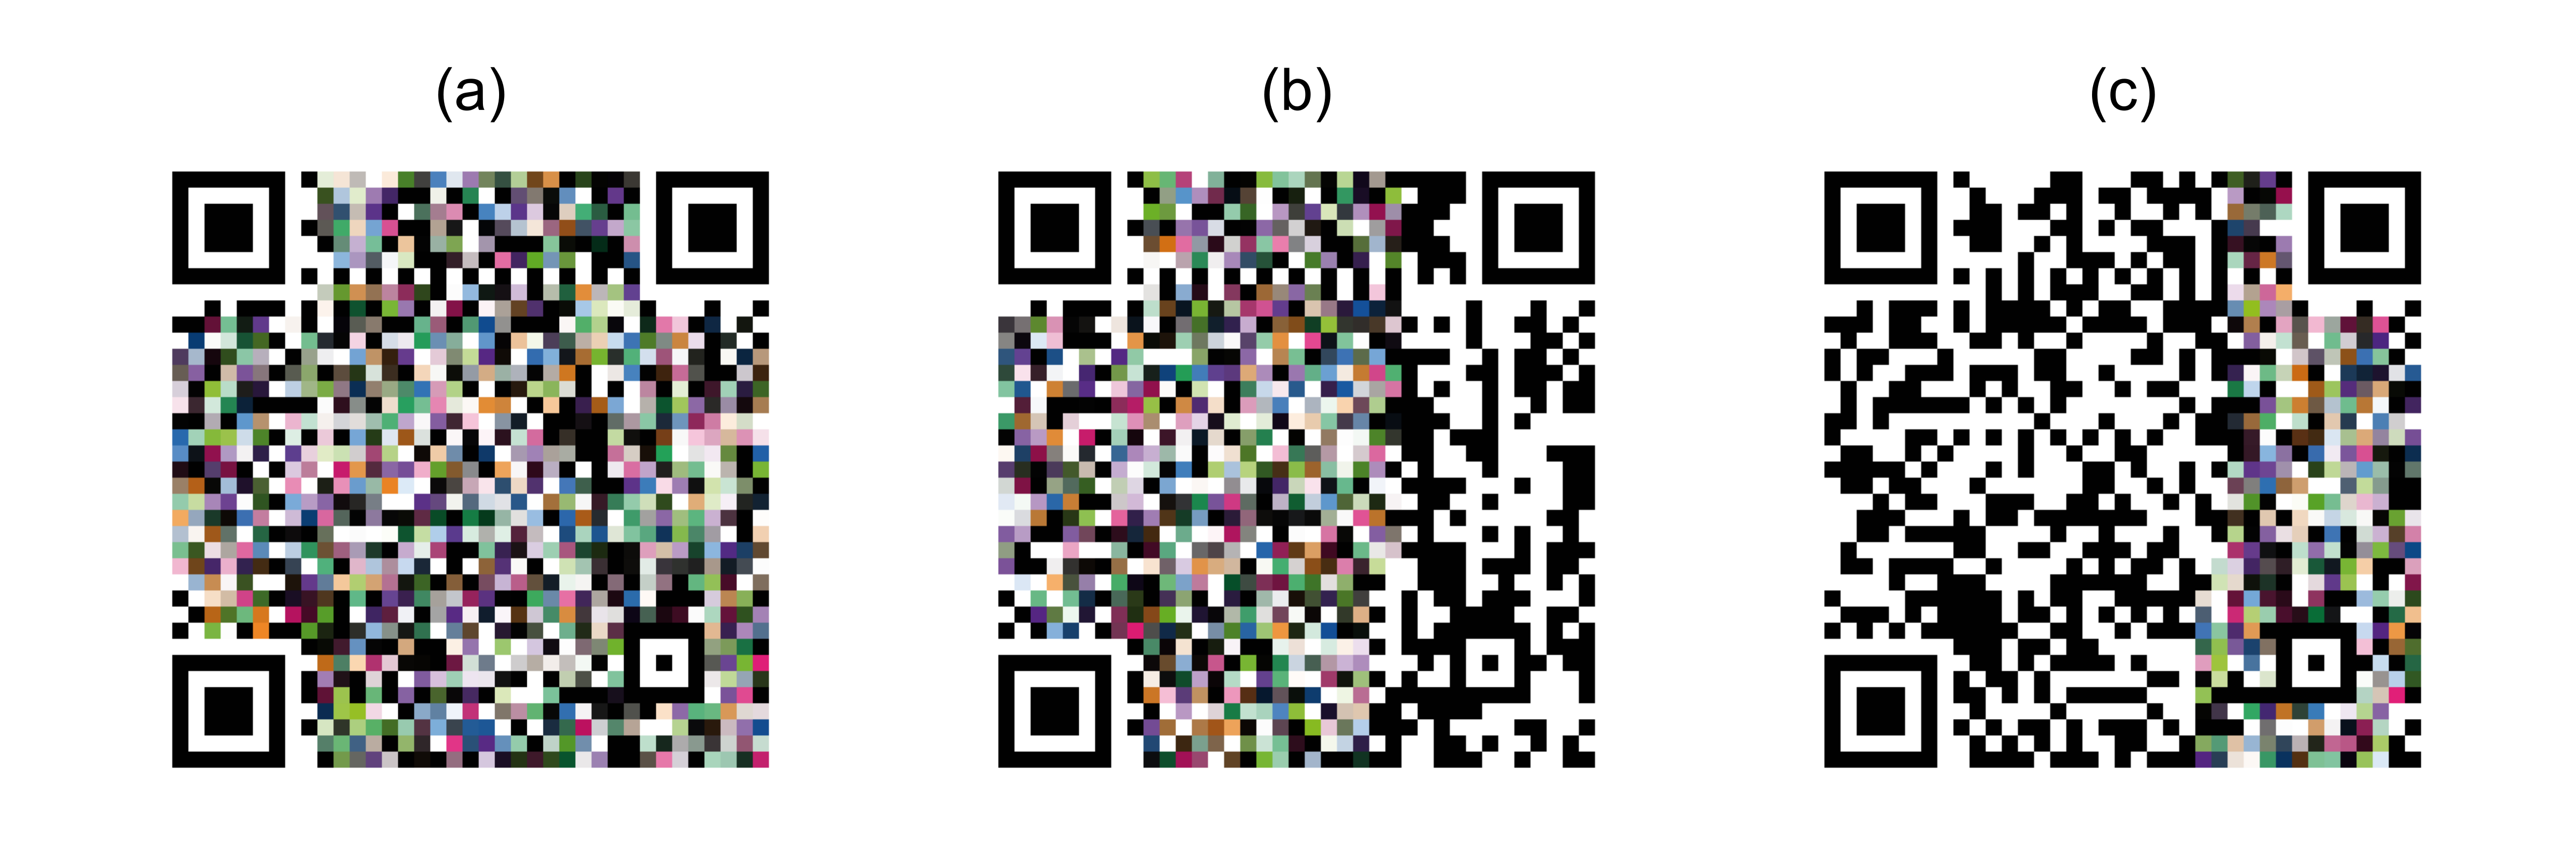 The same QR Code is populated in different areas with 80% of colors for each area. (a) the whole QR Code is populated (EC&D). (b) Only the error correction area is populated (EC). (c) Only the data area is populated.